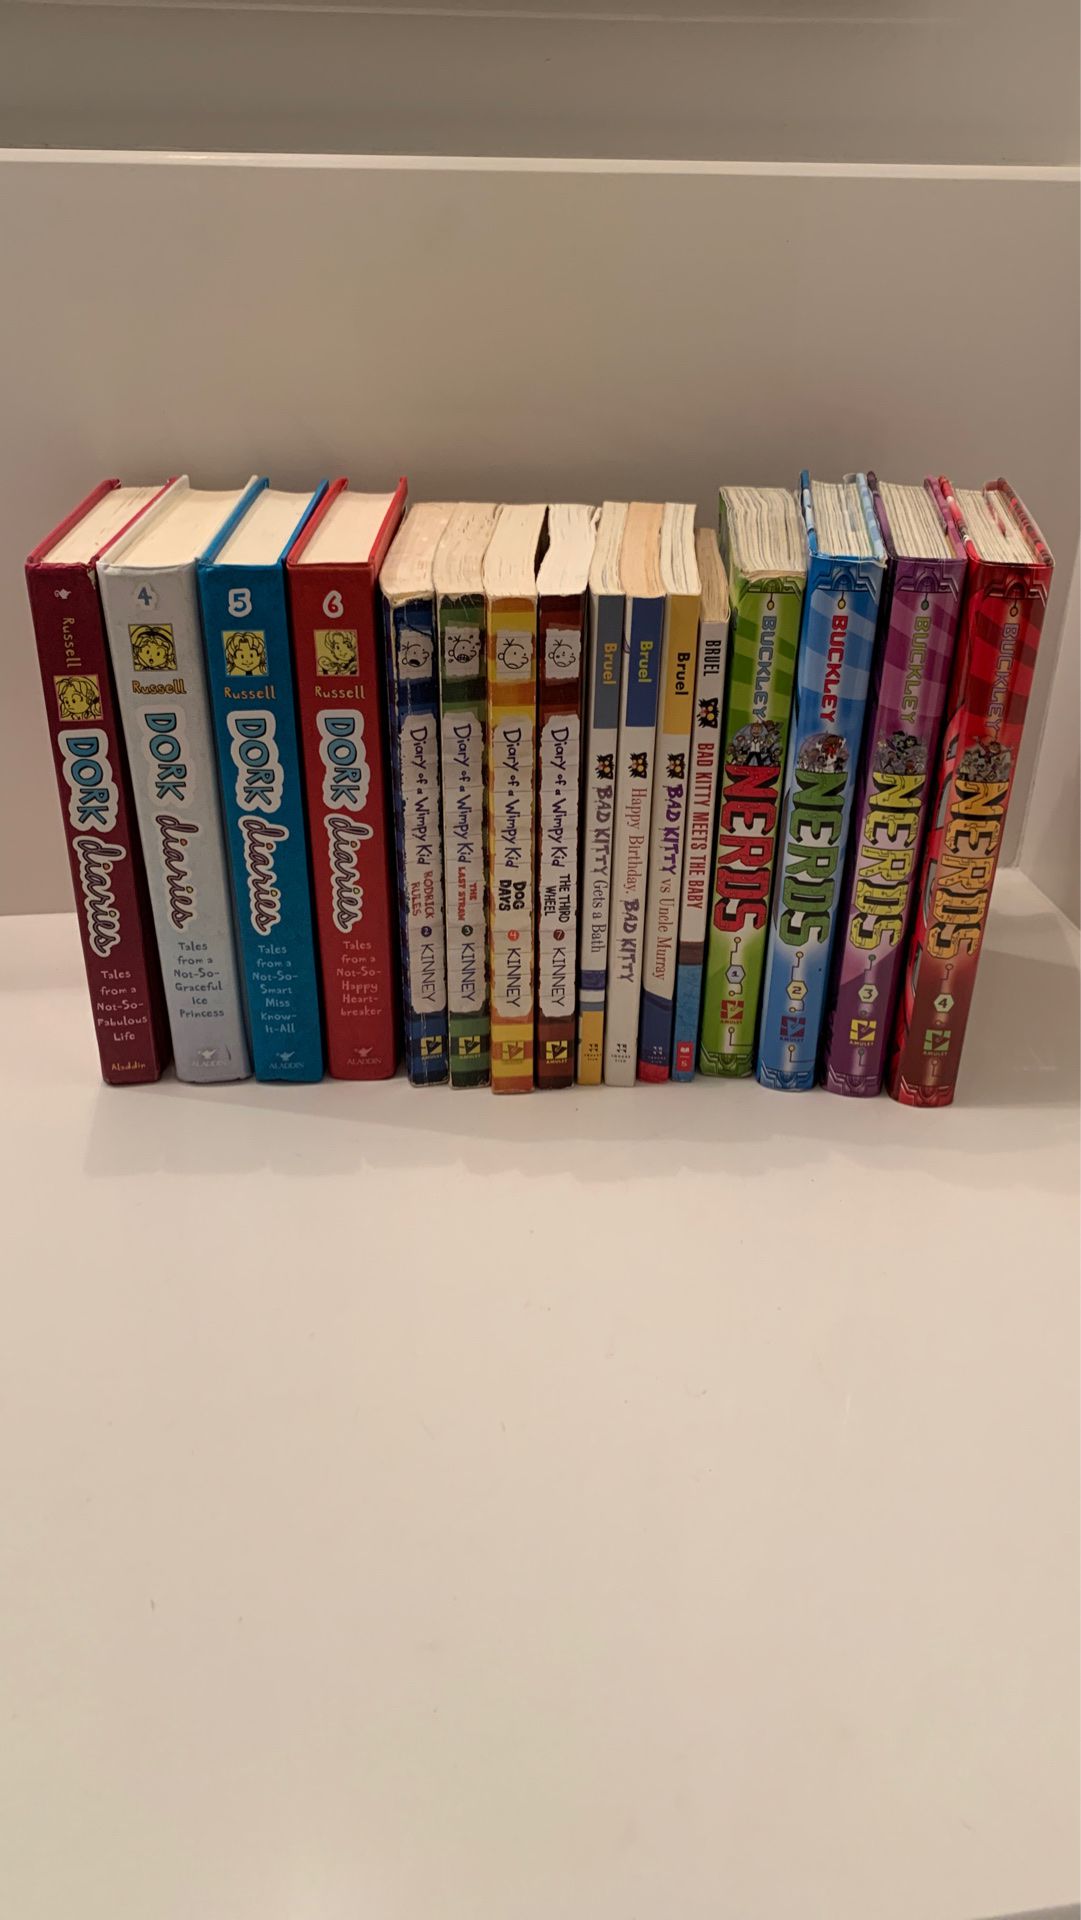 “Dork Diaries” and “Nerds” book Series “Diary of a wimpy kid” “Bad Kitty”